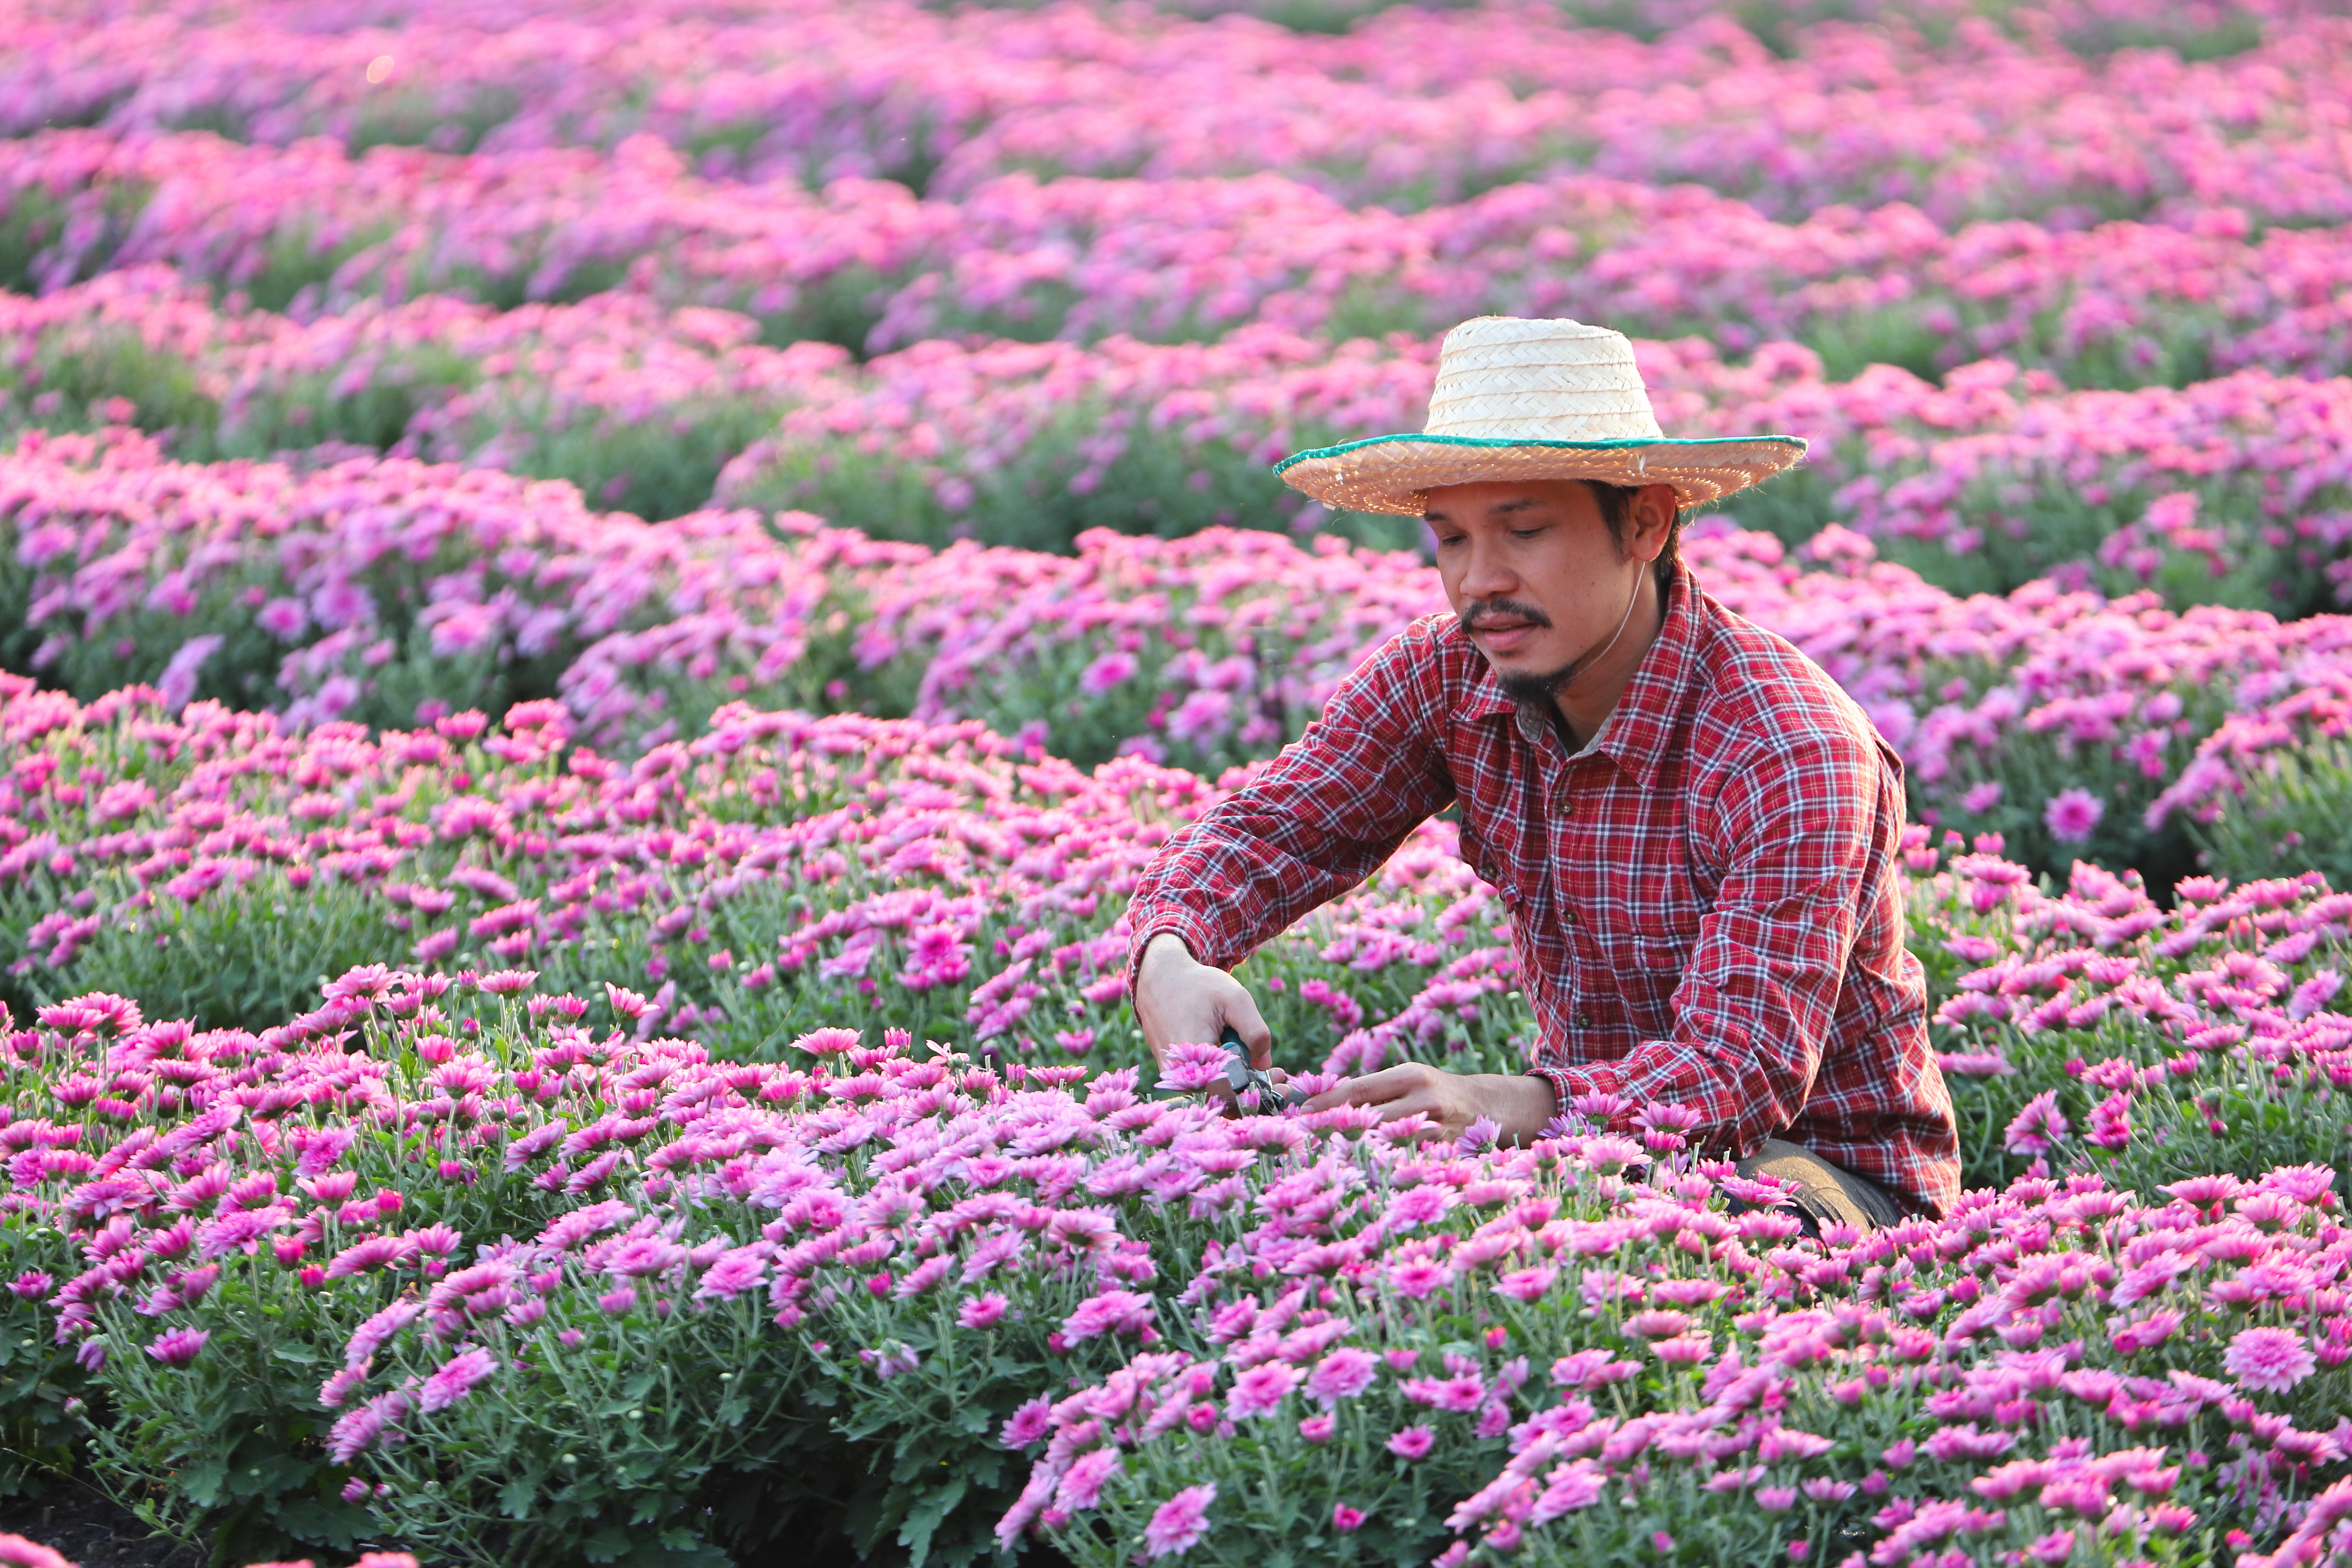 Male agricultural worker wearing a red plaid shirt and straw hat tending to a large field of pink chrysanthemums